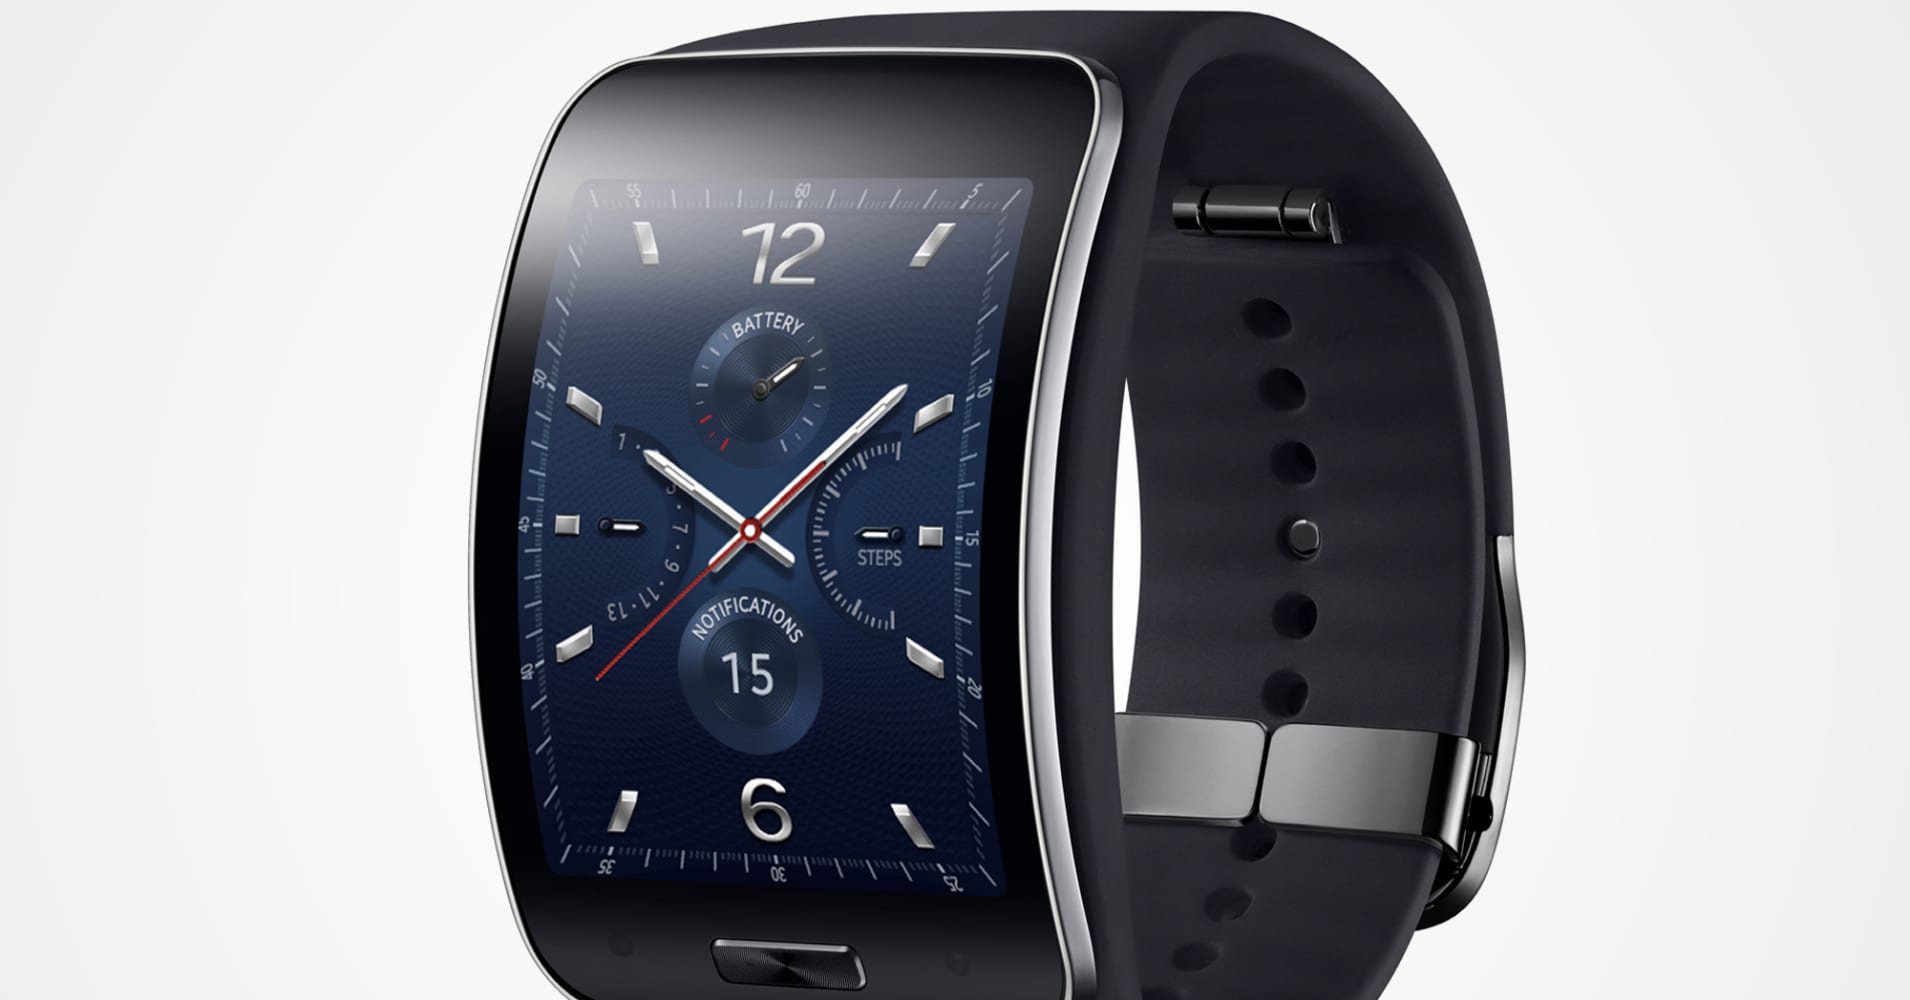 Samsung launches Gear S smartwatch ahead of iWatch